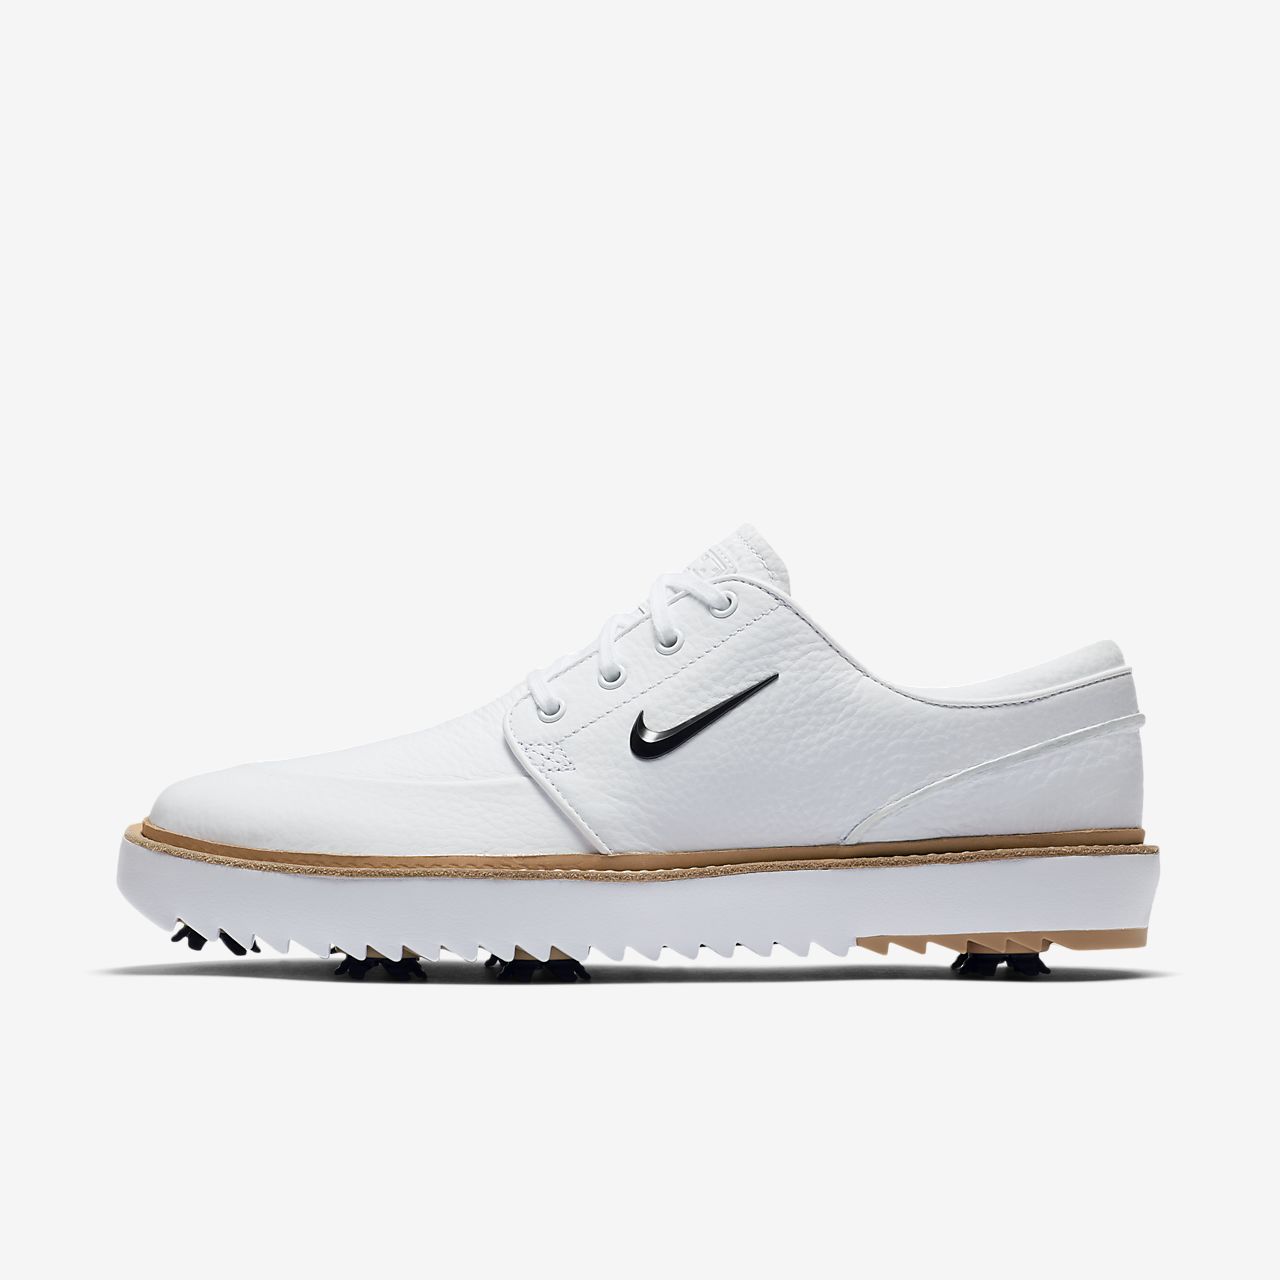 How to choose the best men's nike janoski golf shoes?